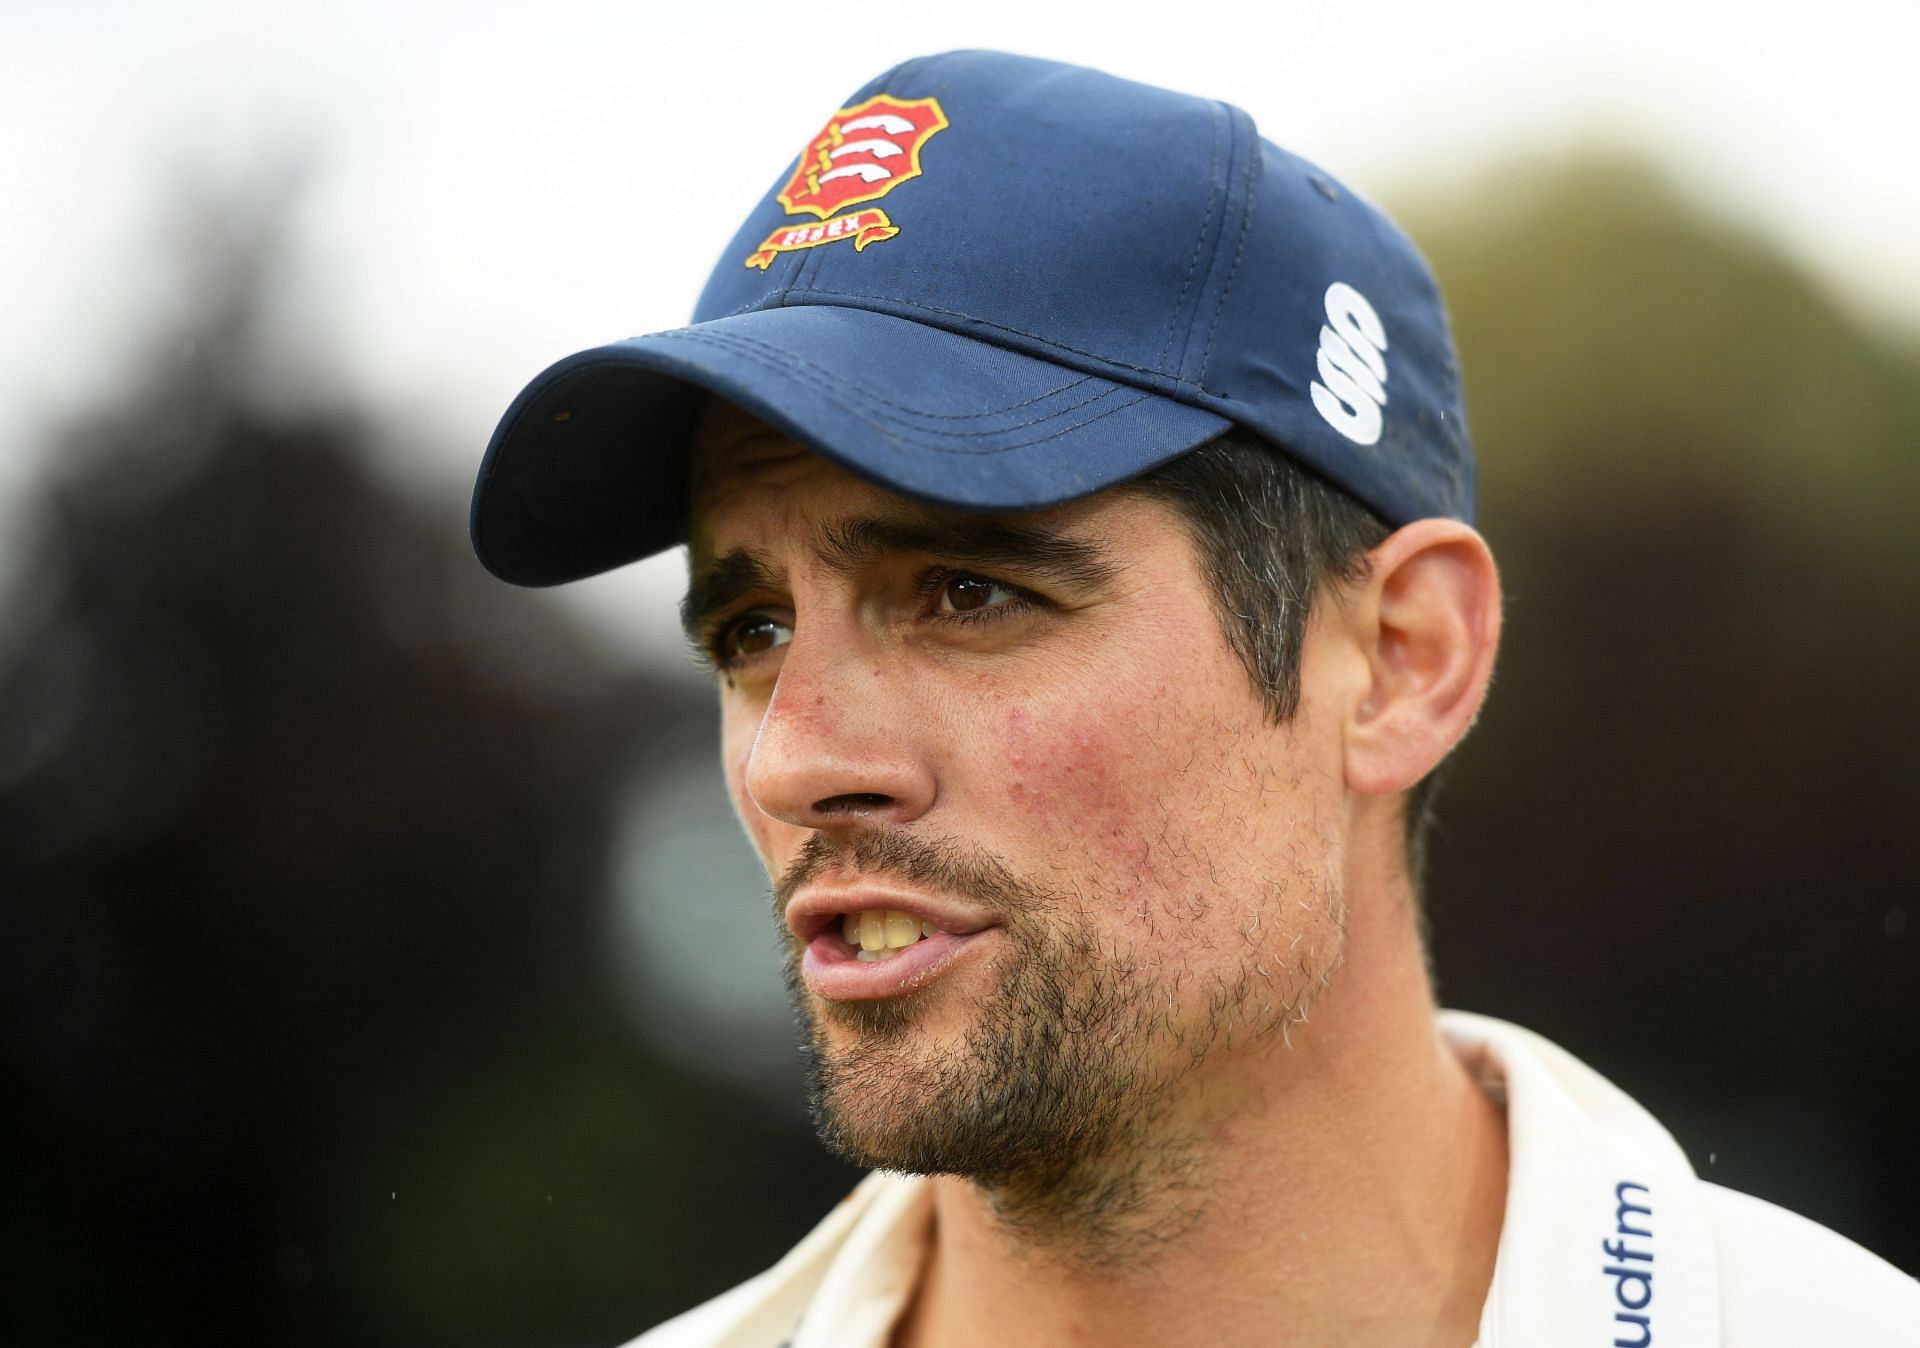 Alastair Cook. (Credits: Getty Images)